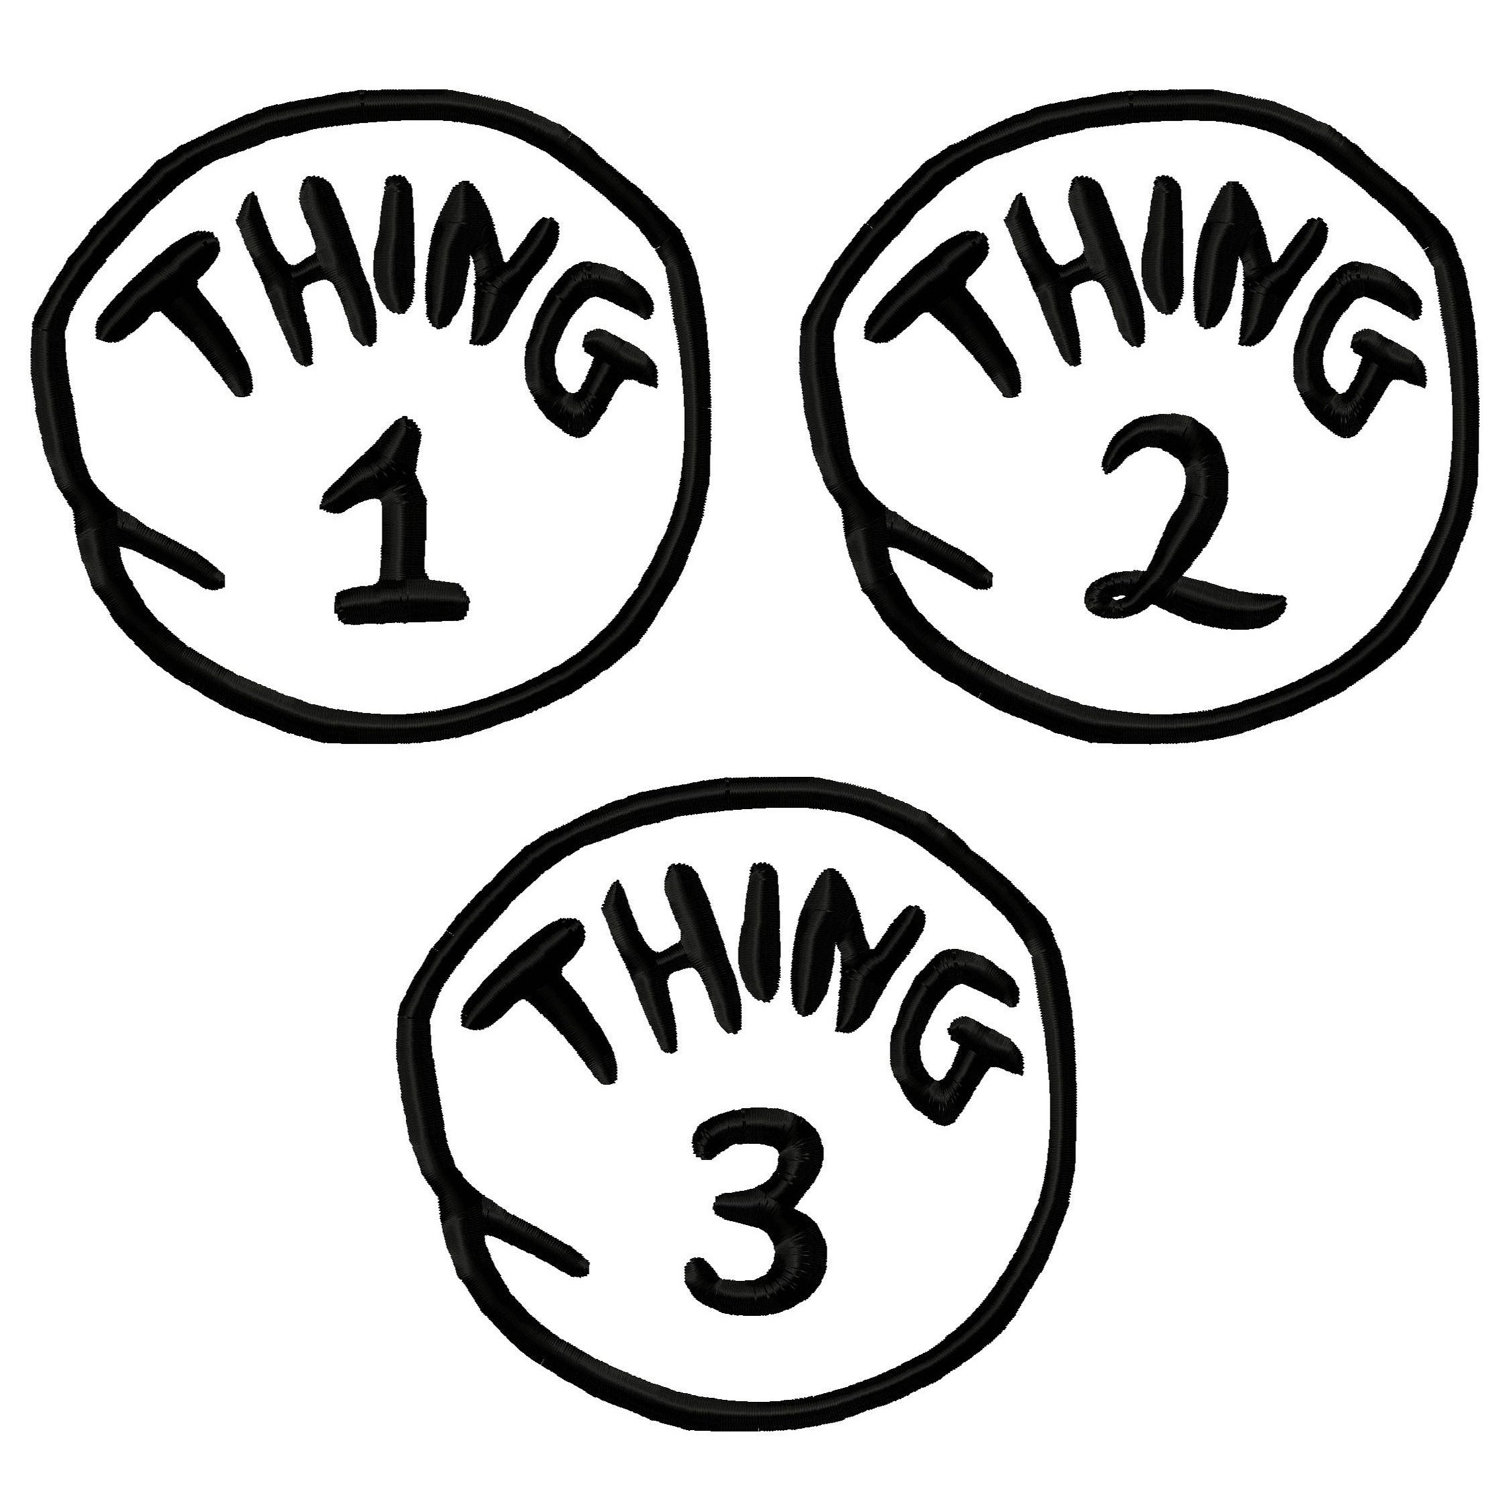 Thing 1 And Thing 2 Printable